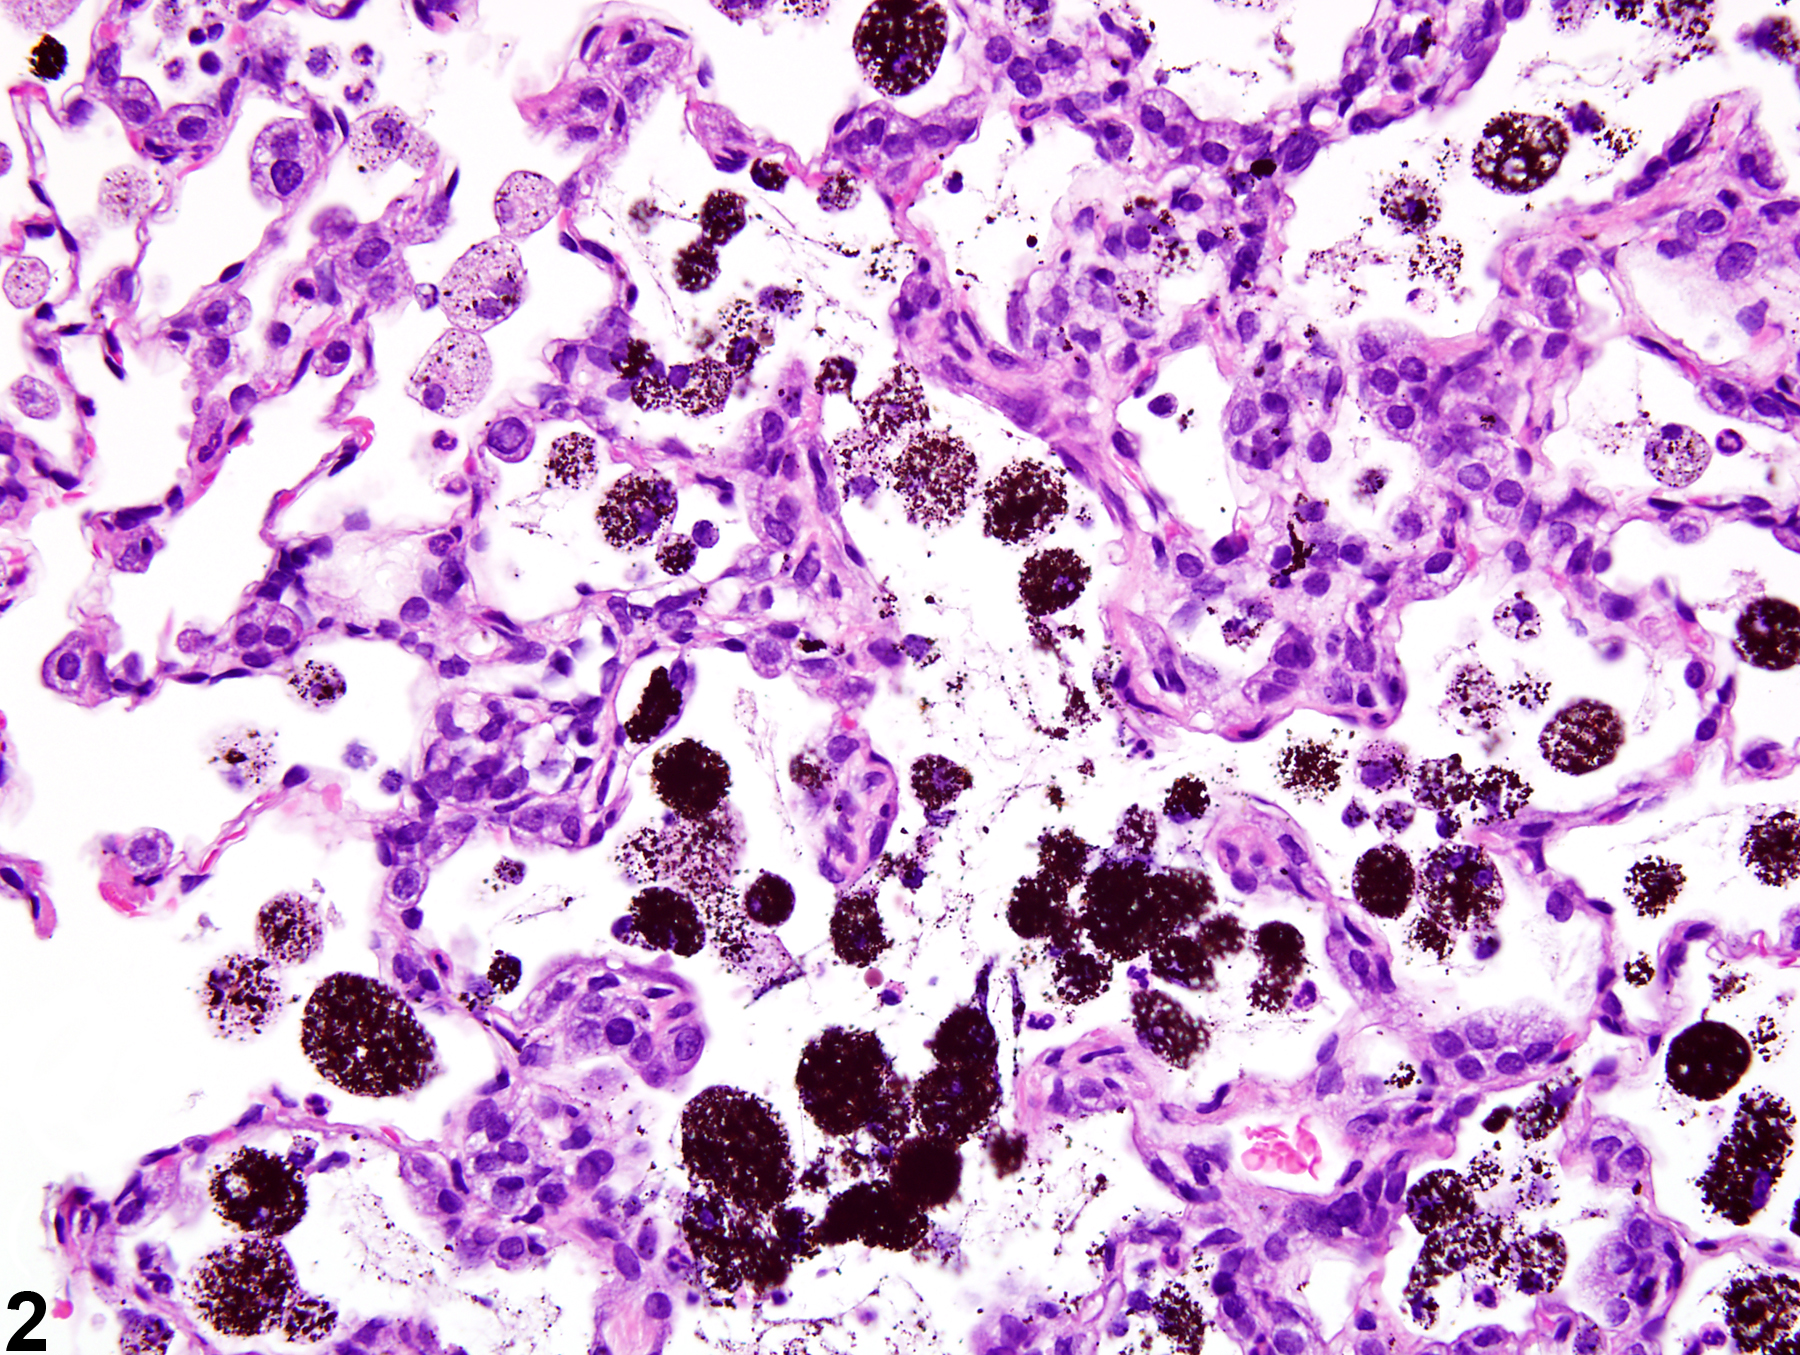 Image of foreign material in the lung from a male Harlan Sprague-Dawley rat in a chronic study